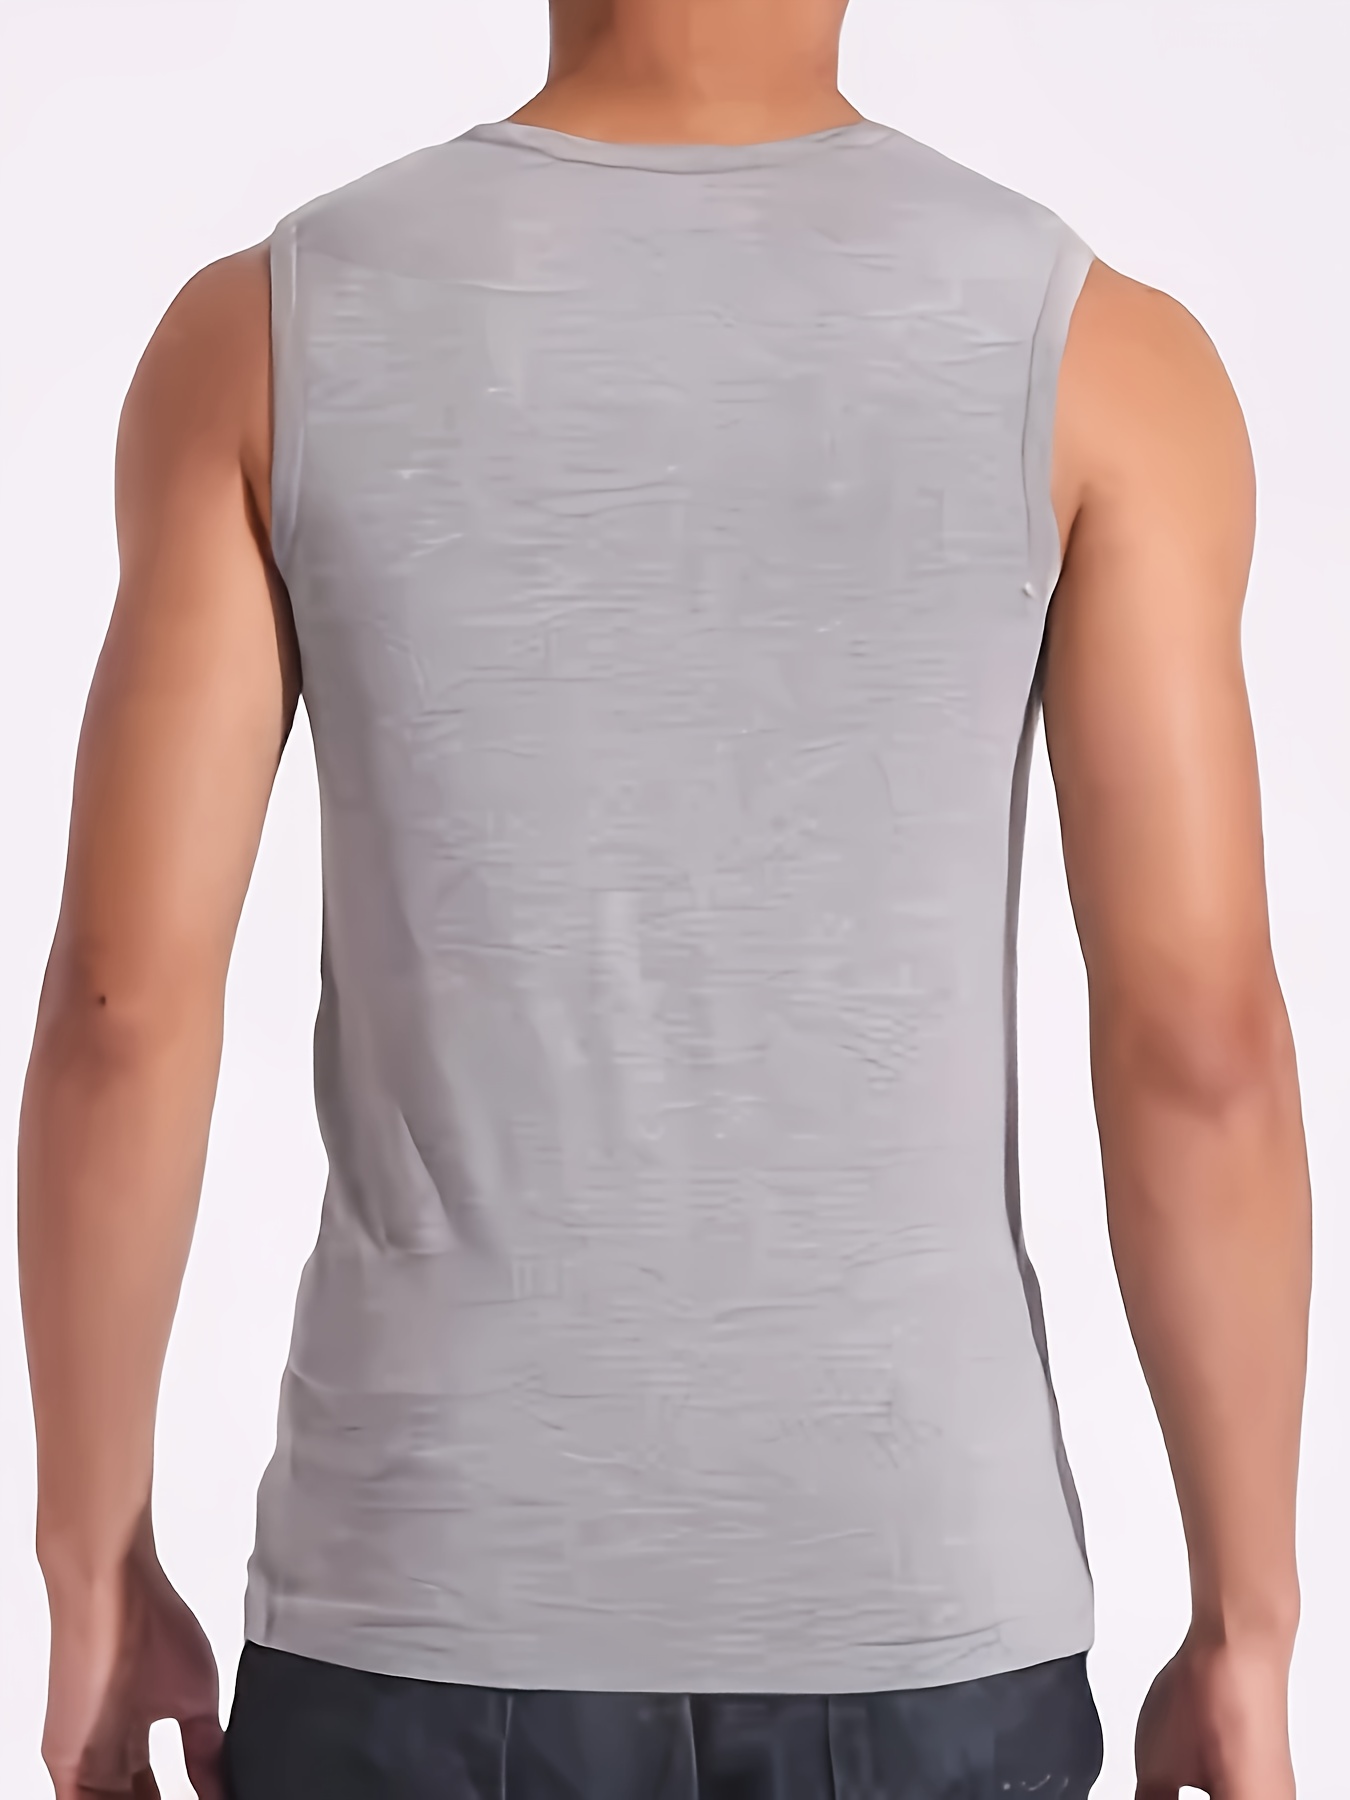 mens solid tank top active quick dry breathable crew neck sleeveless shirt mens clothing for summer outdoor details 1